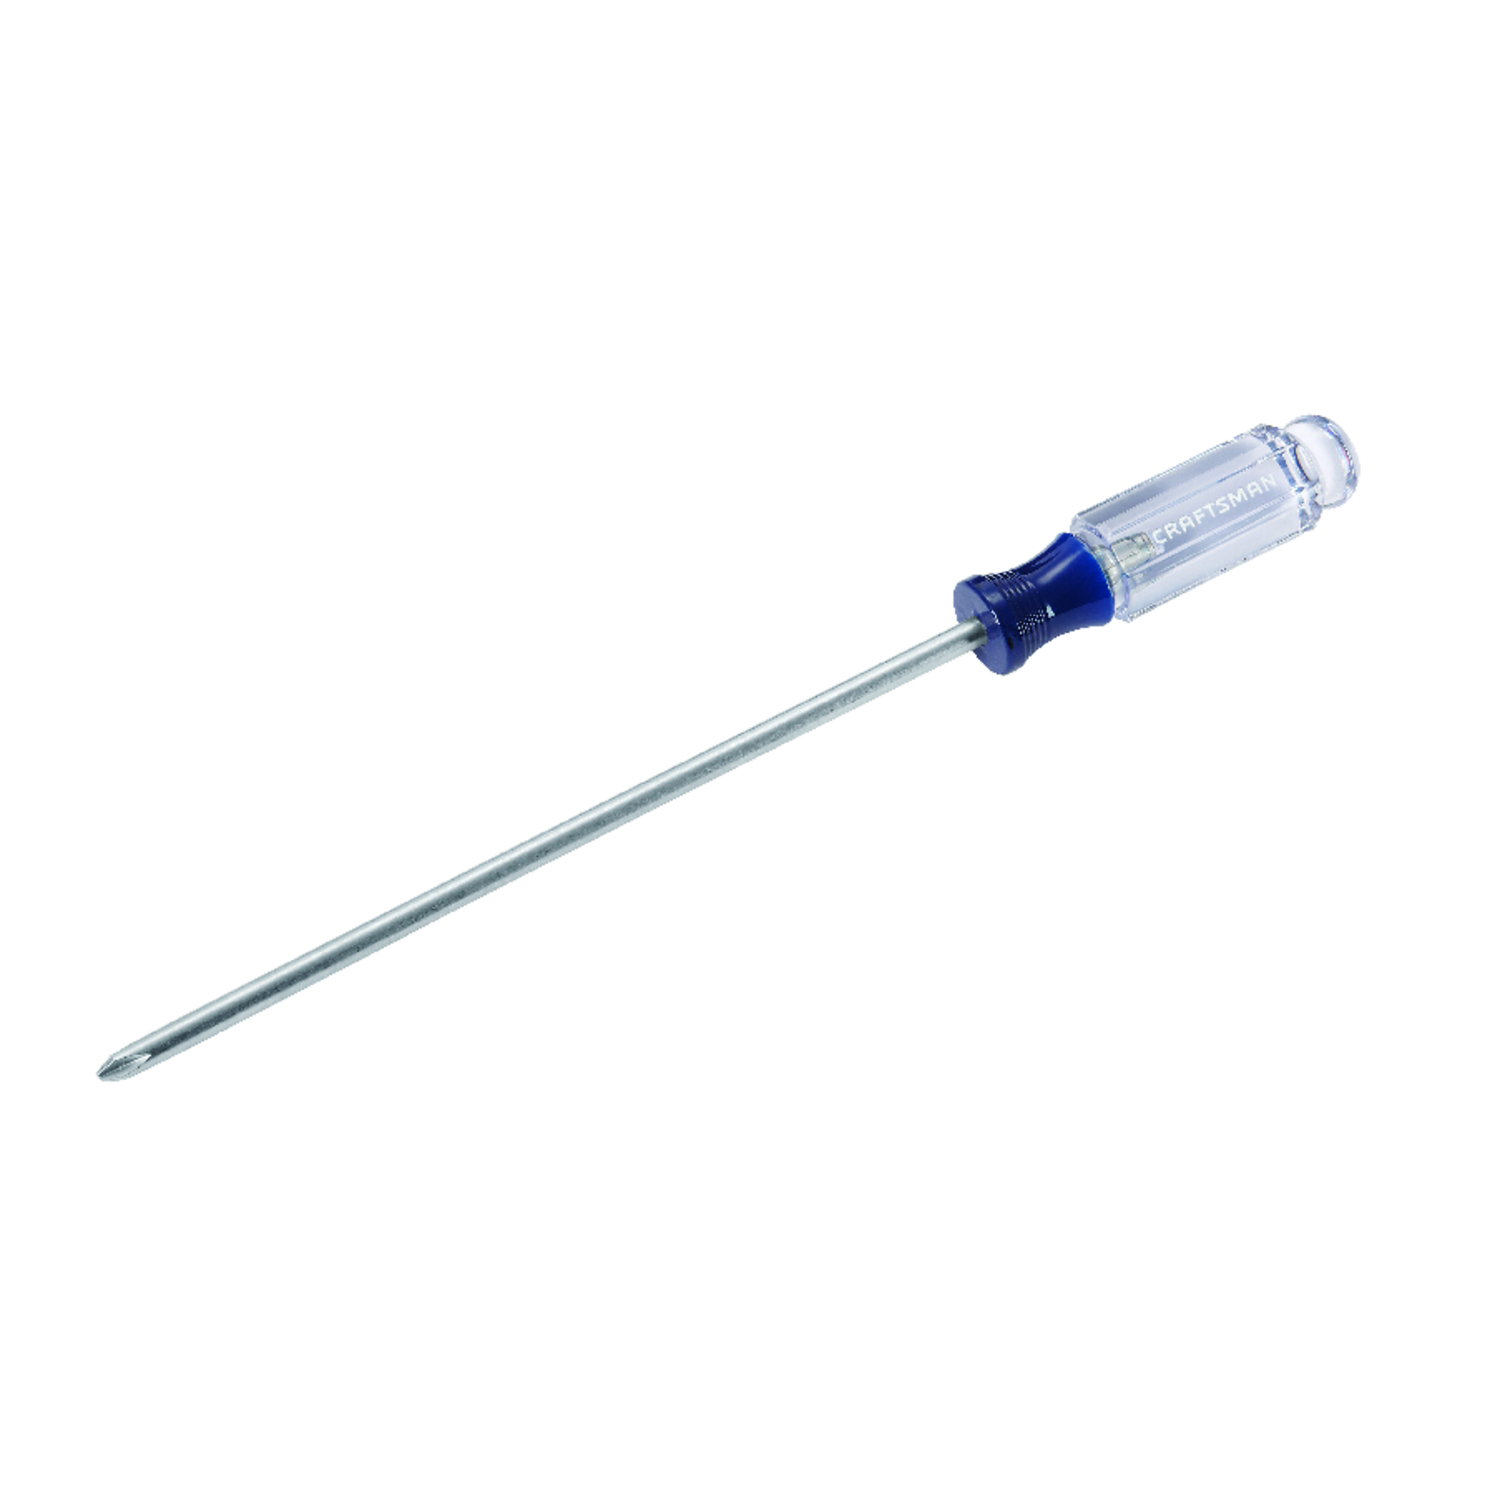 UPC 648738000307 product image for Craftsman Phillips No. 2 Screwdriver Clear 1 No. 2 8 in. L Steel | upcitemdb.com